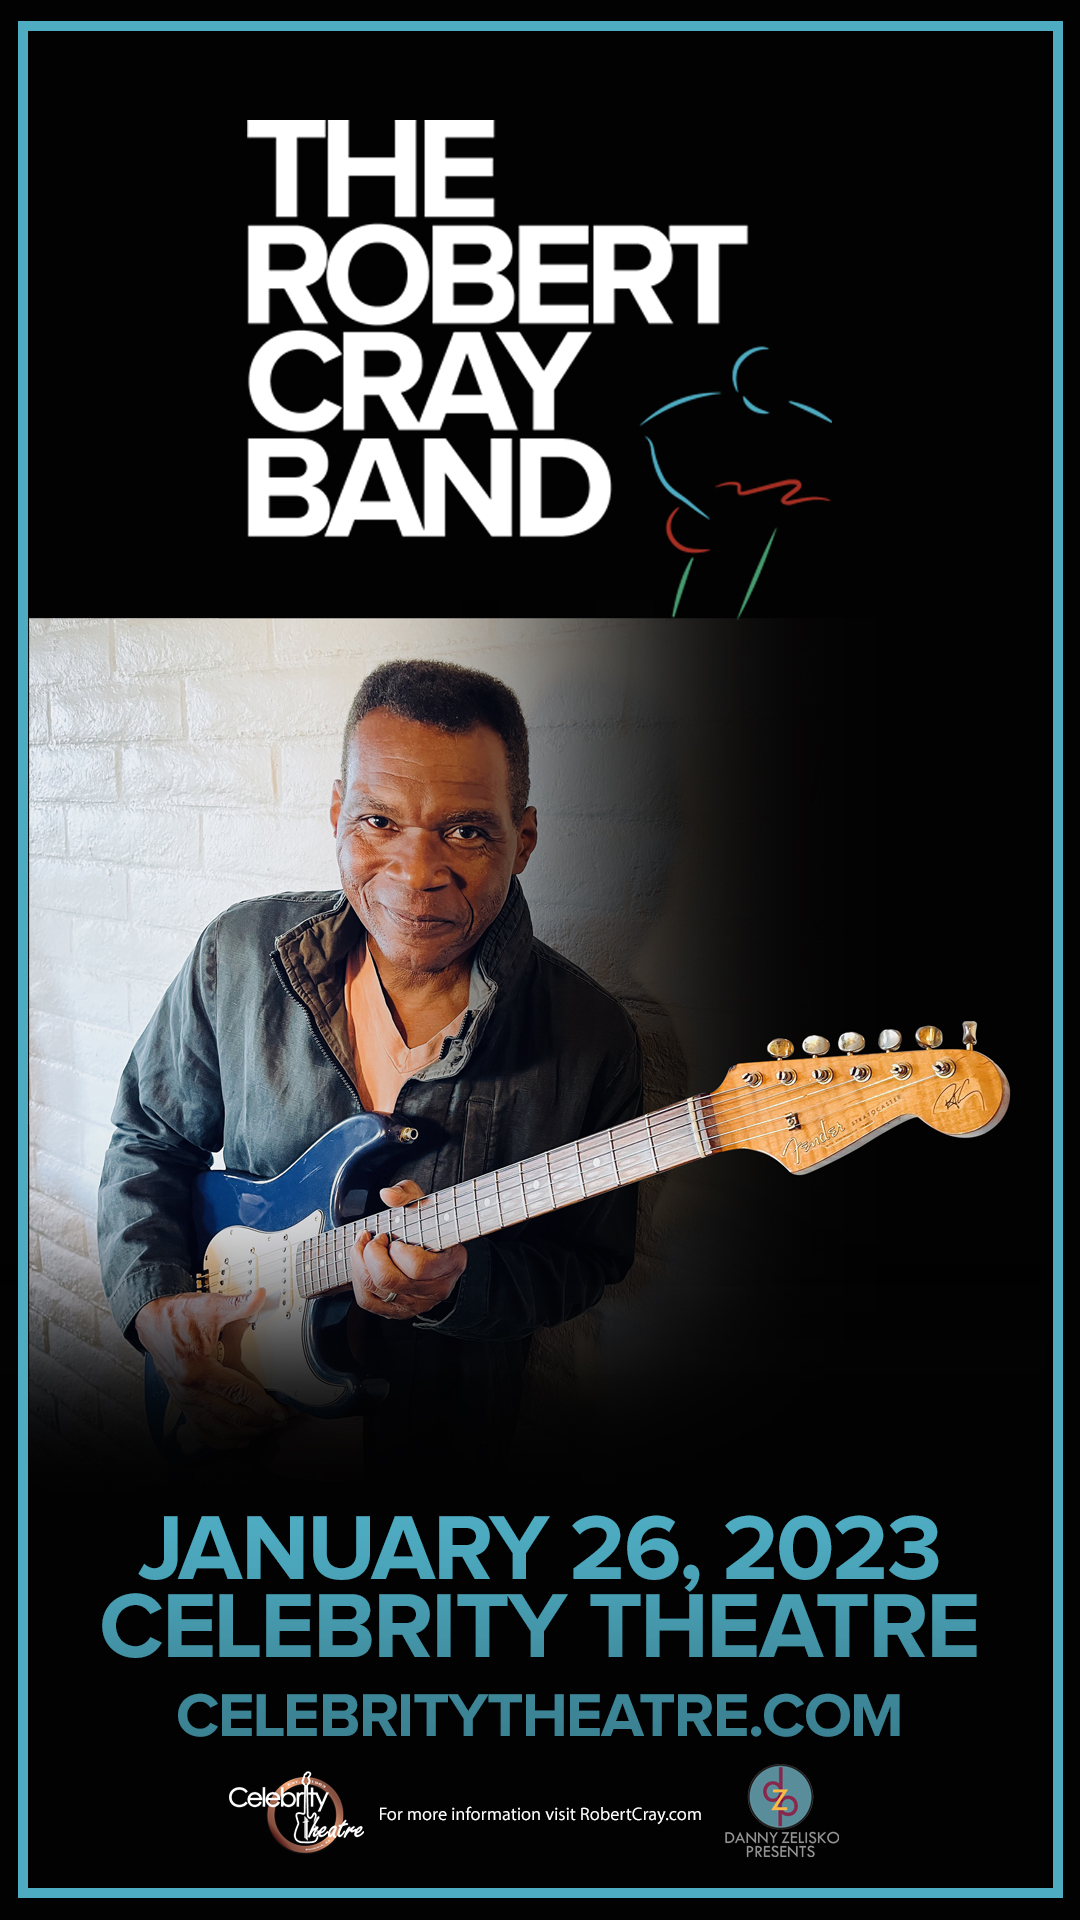 The Robert Cray Band LIVE at Phoenix’s Celebrity Theatre on January 26